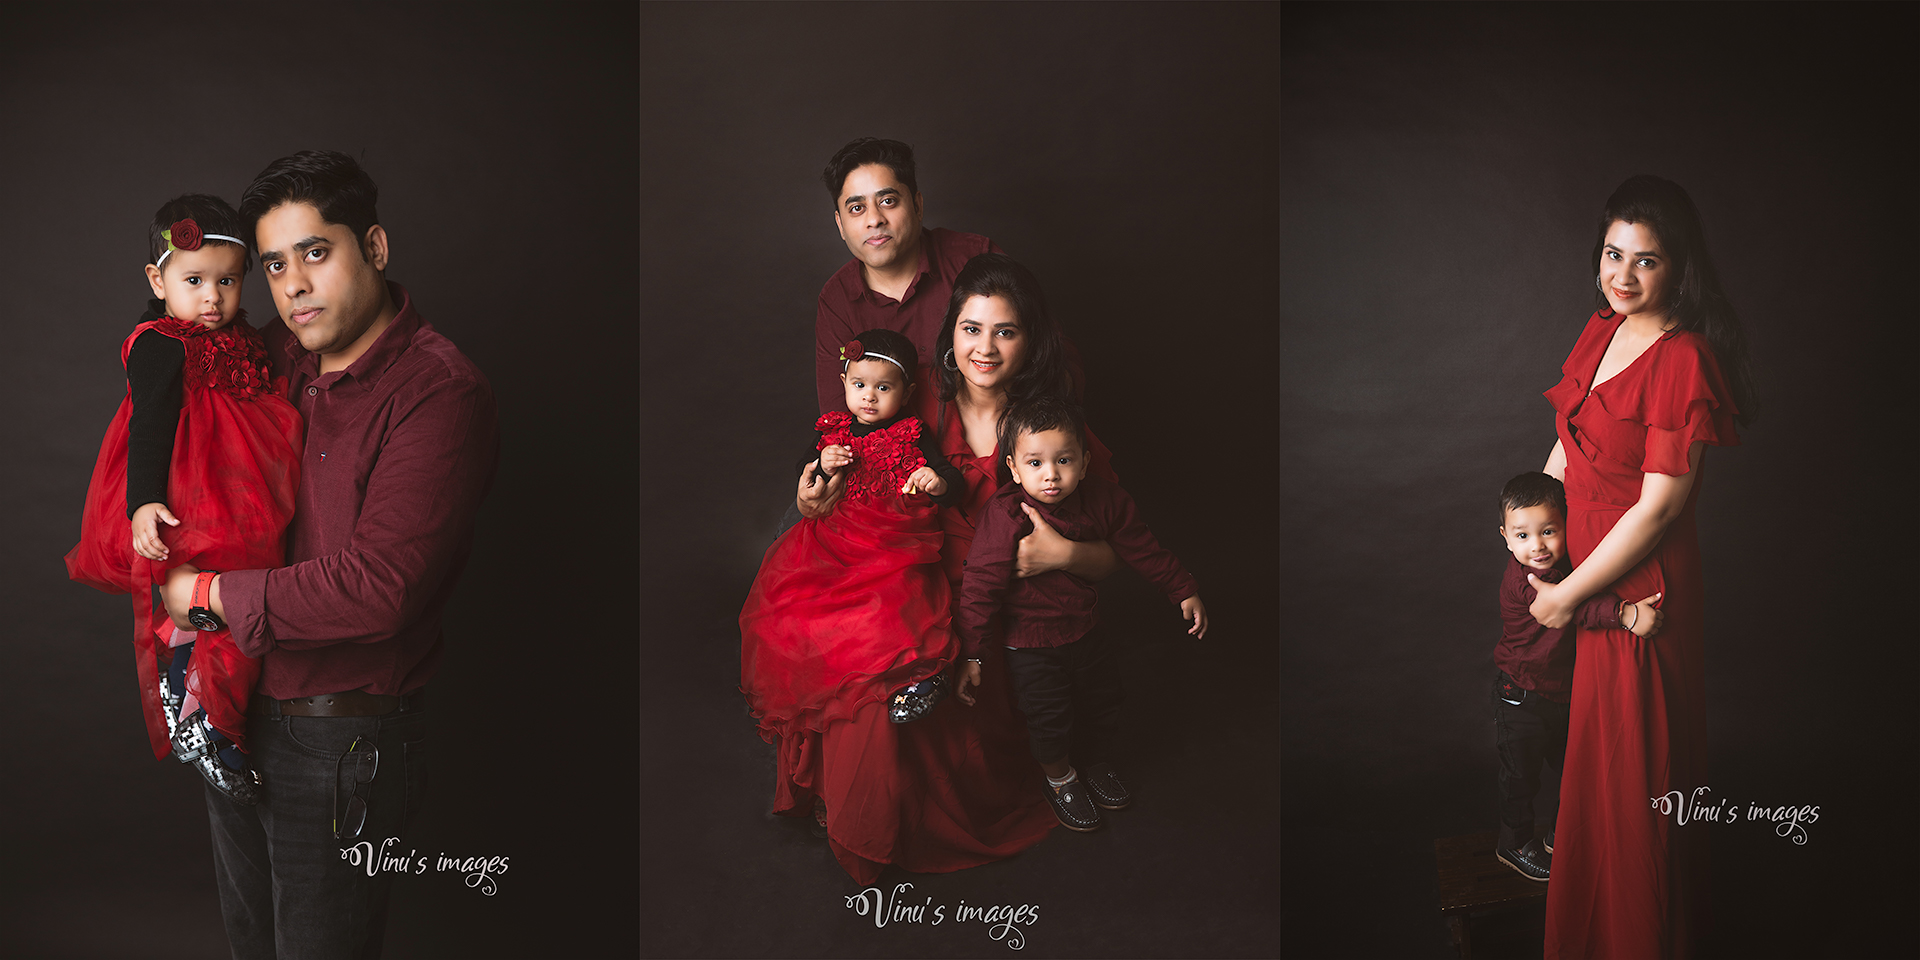 Family Photo Outfits Ideas – How to Dress for a Family Portrait?